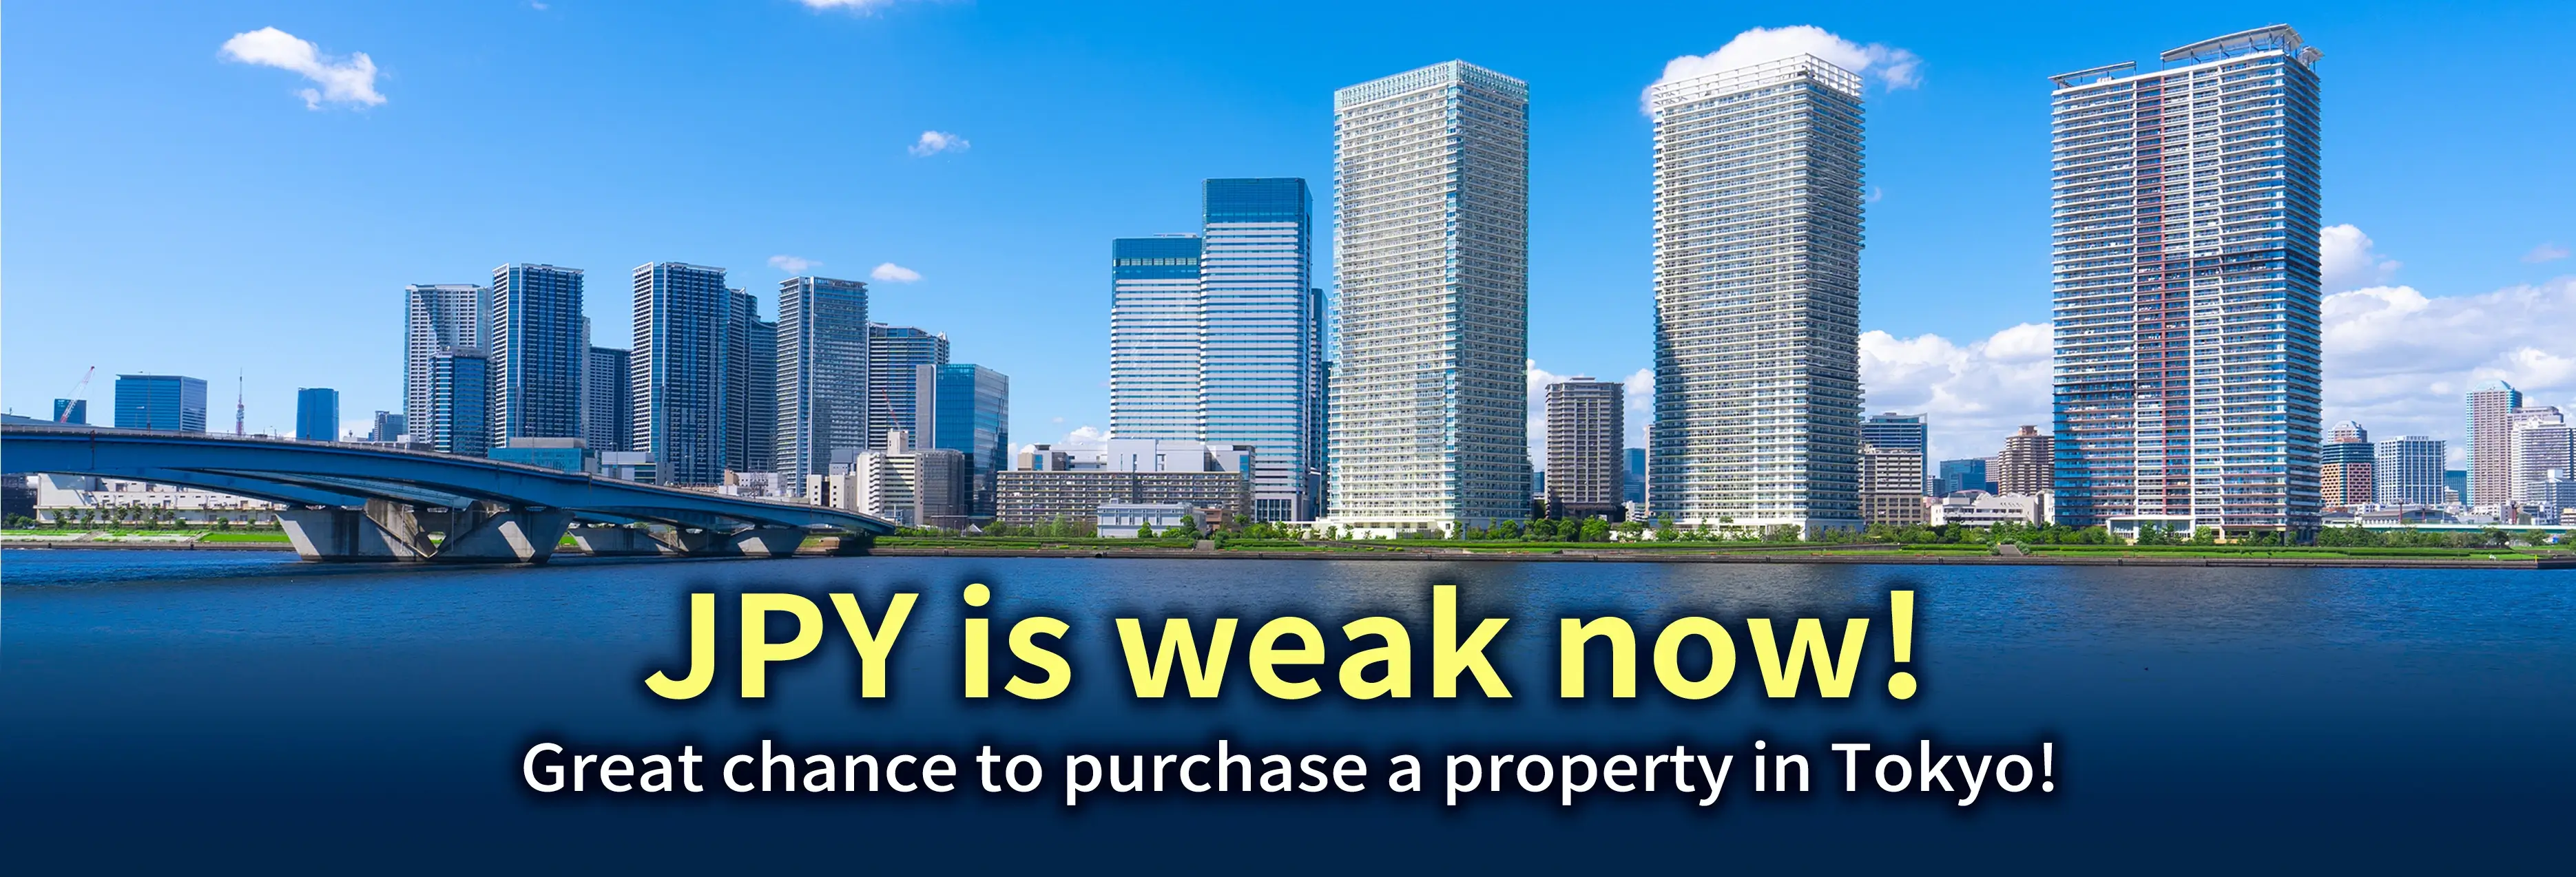 JPY is weak now! Great chance to purchase a property in Tokyo!